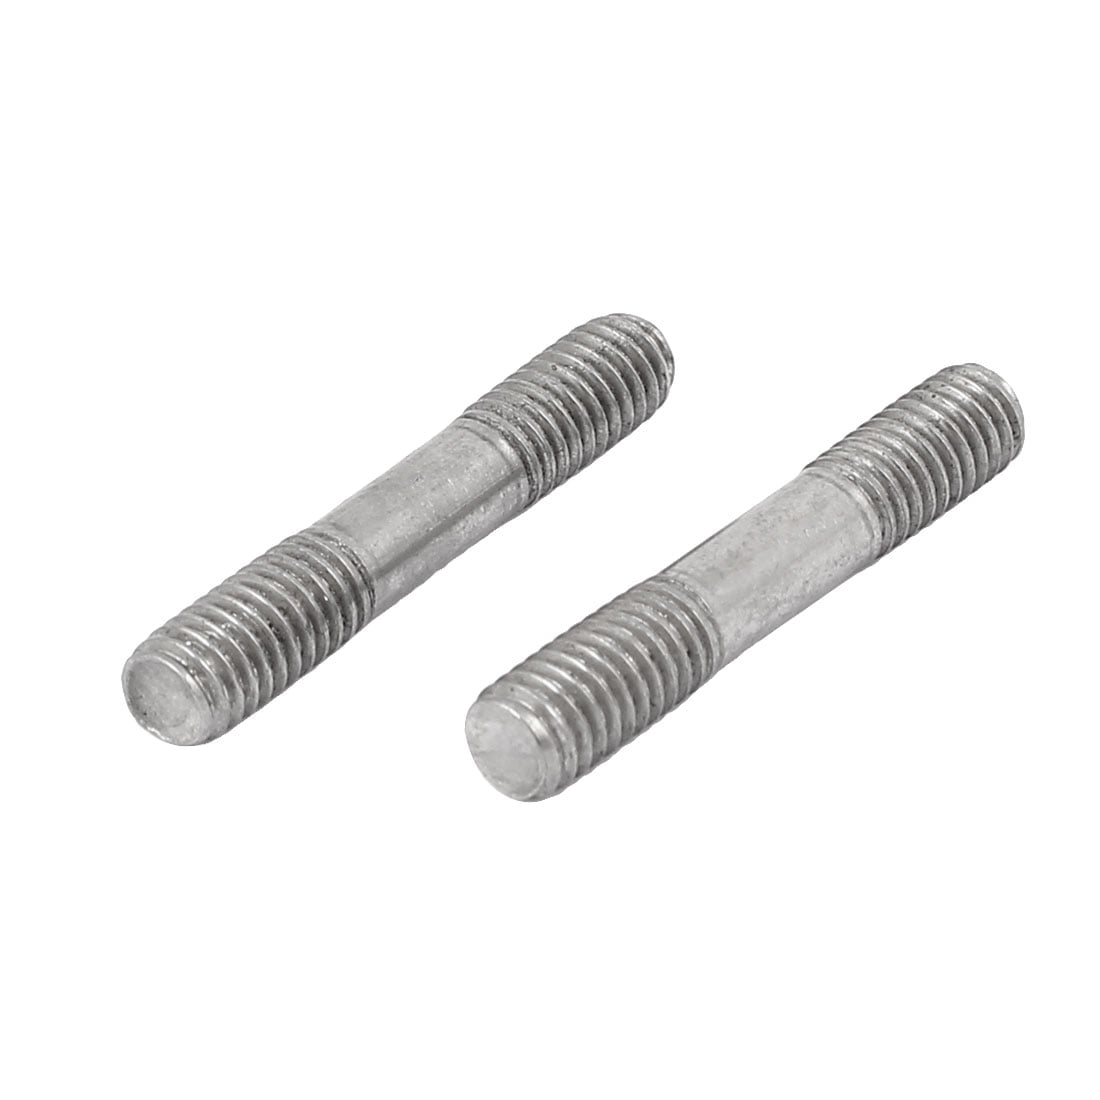 M10 *30-*250 P-1.5 GB901 304 Stainless double end threaded bolt stud screws rod 